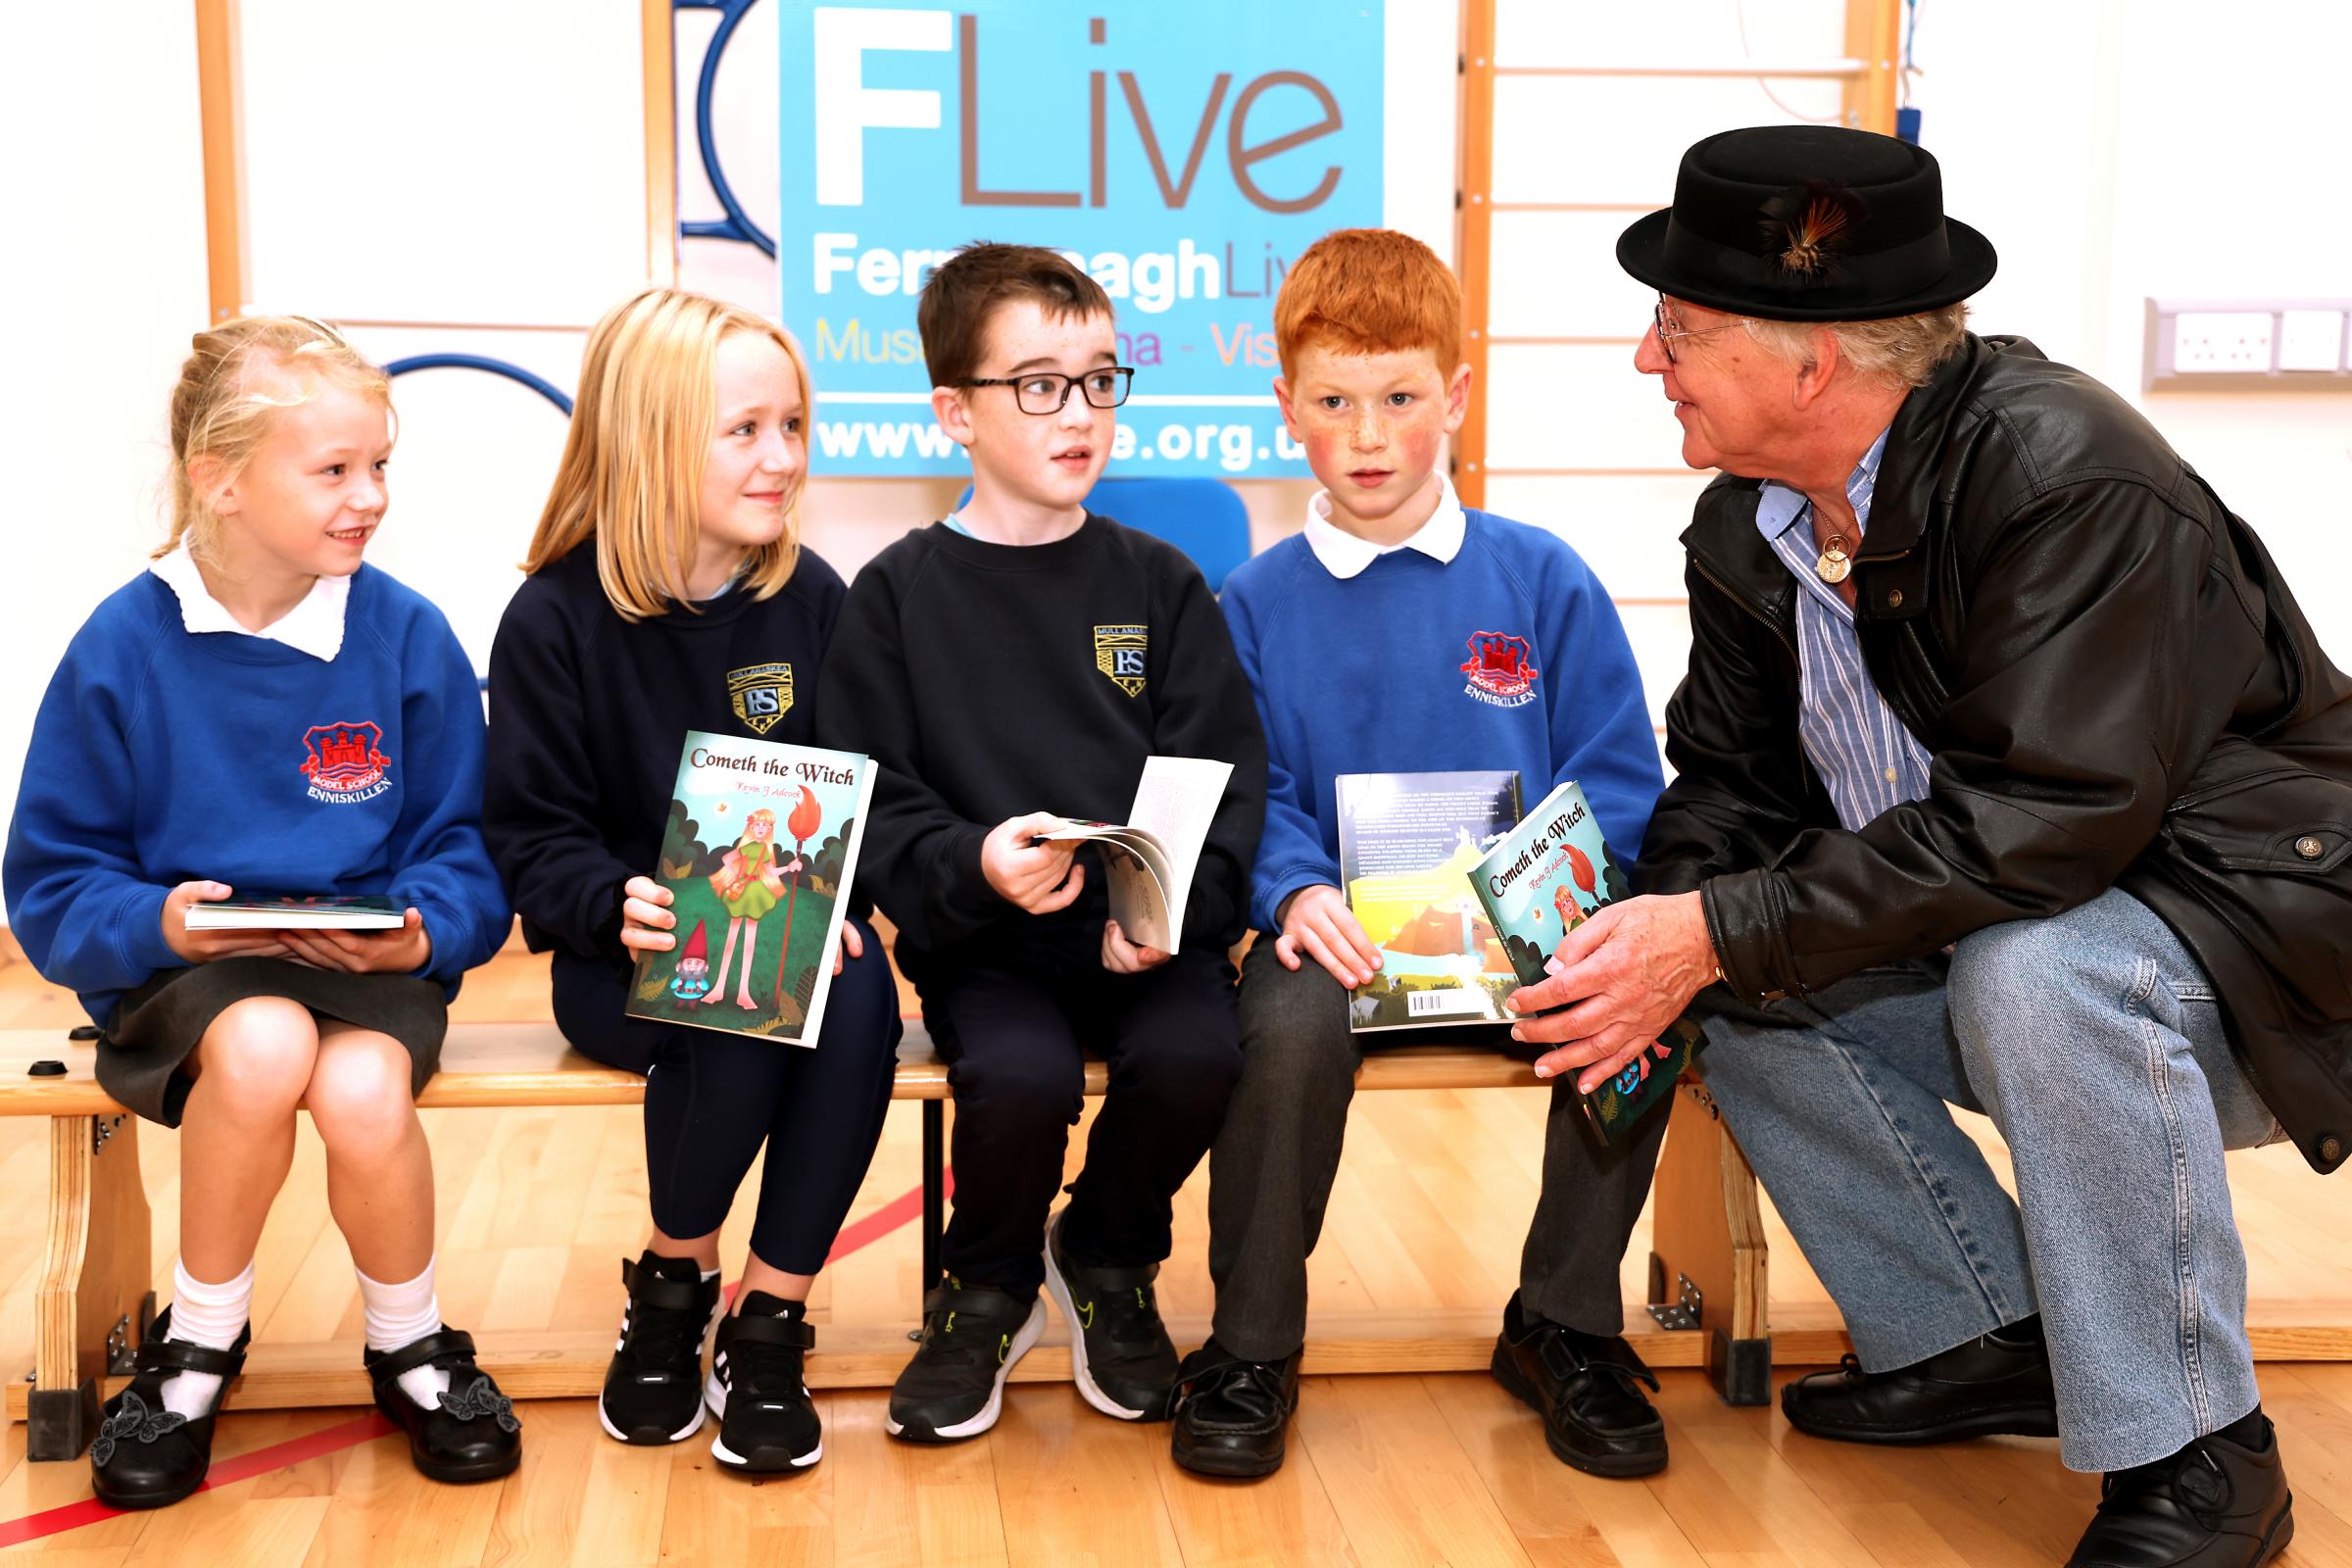 Kevin J Adcock, Author, speaking with pupils from Enniskillen Model and Mullanaskea Primary Schools.